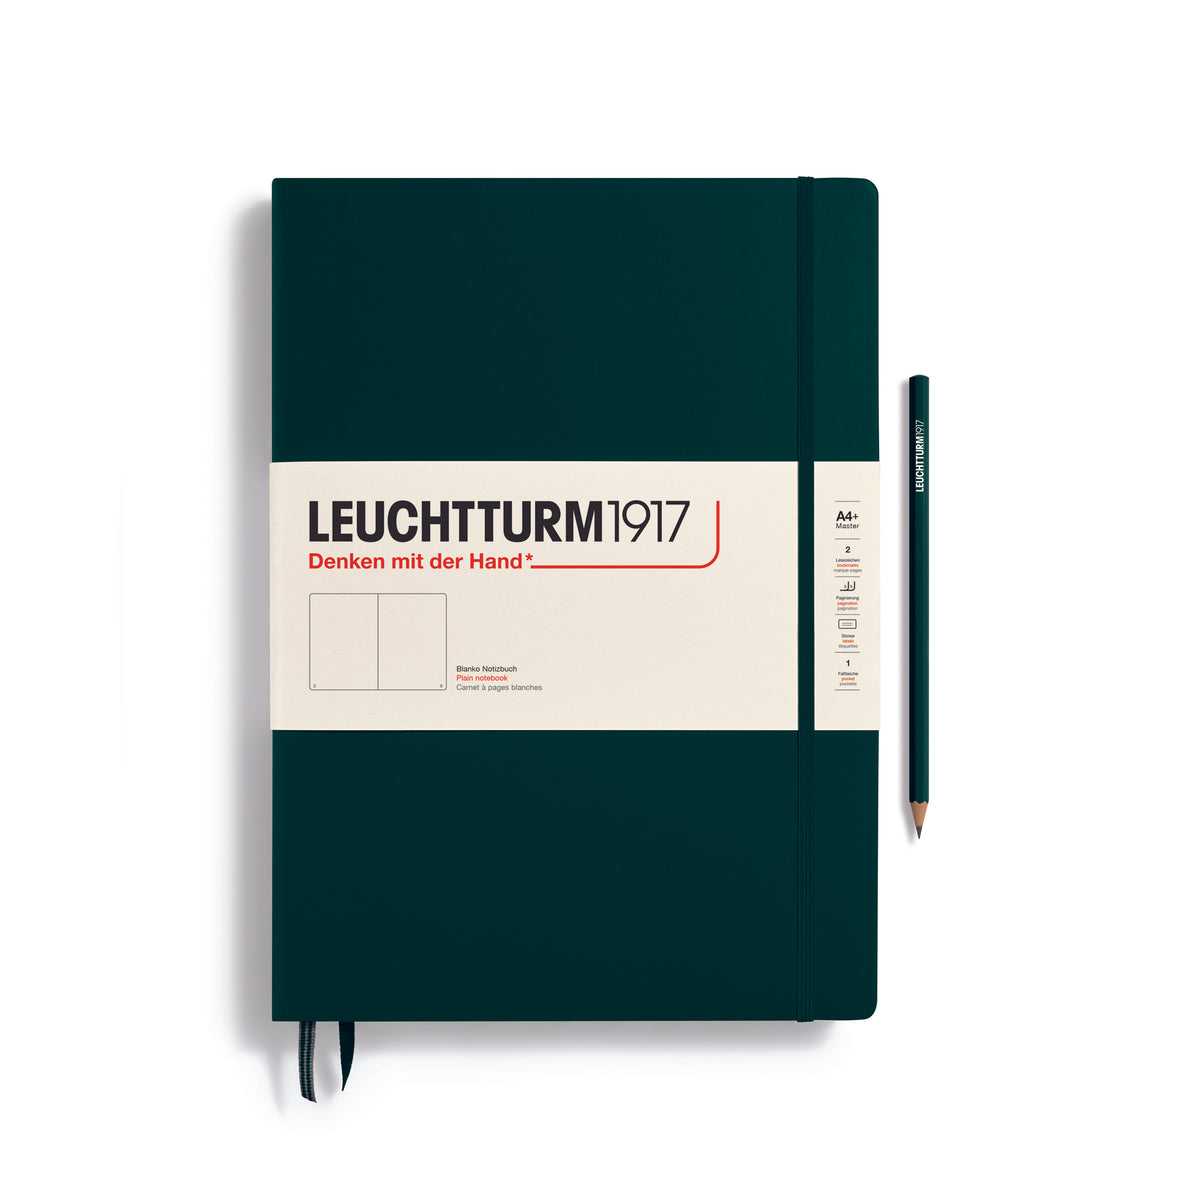 A large forest green notebook with a white paper band around it with the logo of the brand Leuchtturm1917. Below this is an image of the page ruling inside - in this case, plain or blank. It has two page marker ribbons showing at the bottom near the binding and a matching colour elastic notebook closure holding it neatly together. A forest green Leuchtturm pencil is shown at the side of the book.